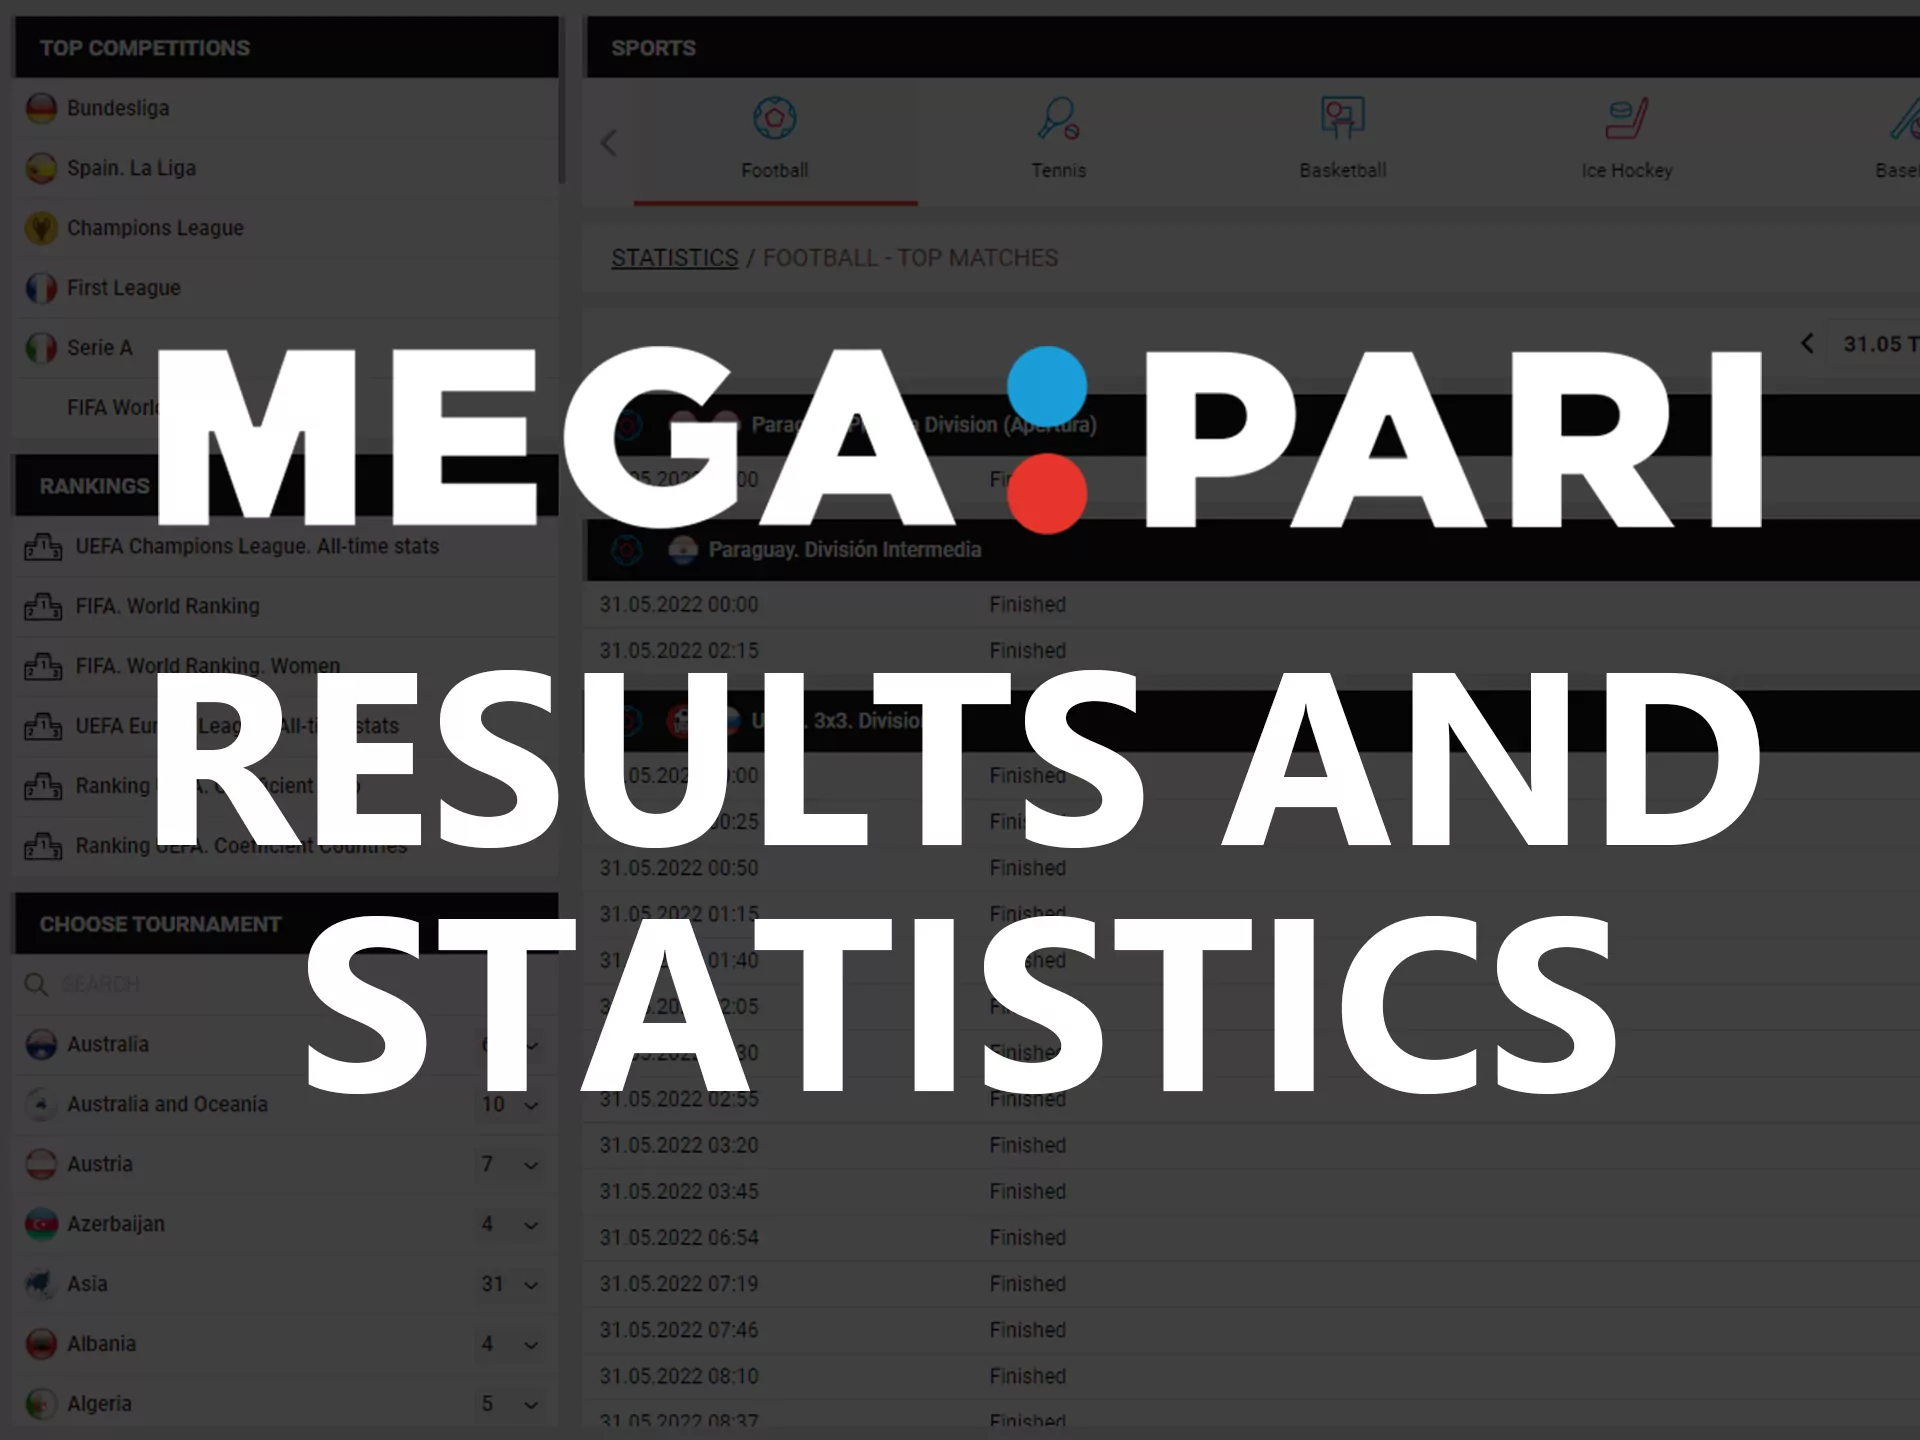 You can watch through the results of the matches at Mega Pari.